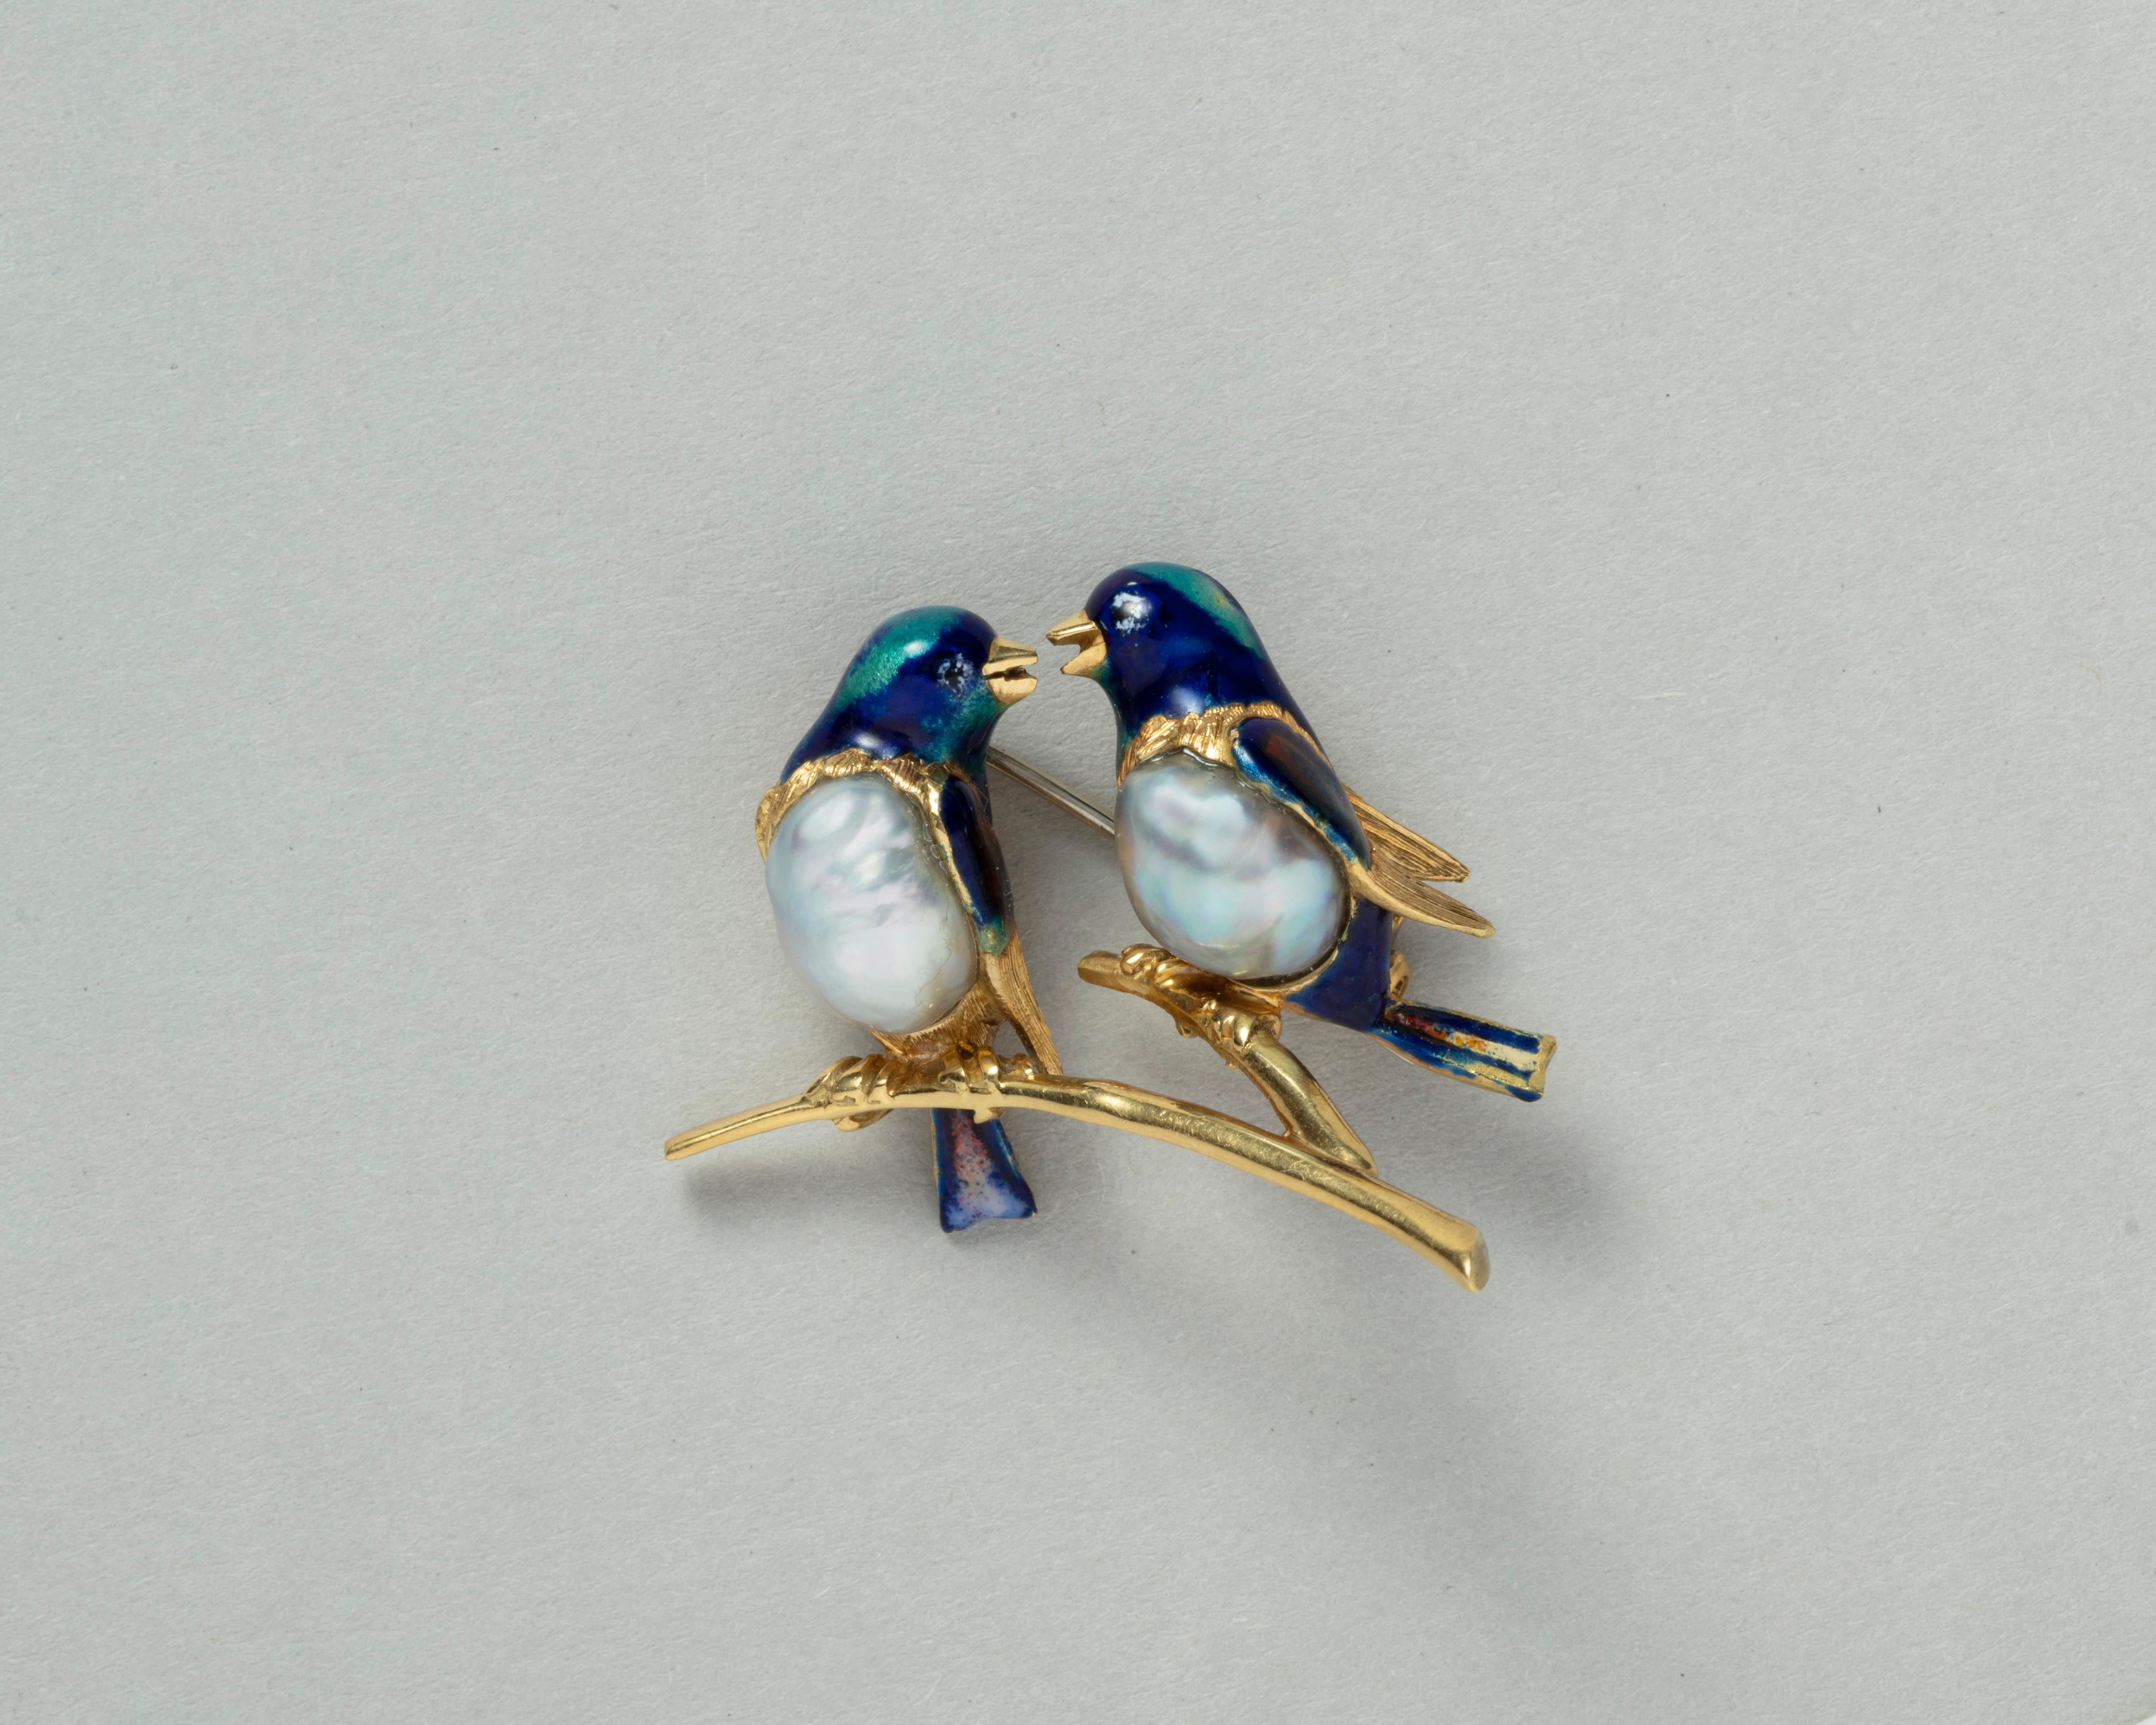 An 18 carat gold brooch with two birds on a branch, they have colorful enamel and a large unpierced grey pearl as their belly, Italian, circa 1970s.

weight: 13.41 gram
dimension: 4 x 2.5 cm
